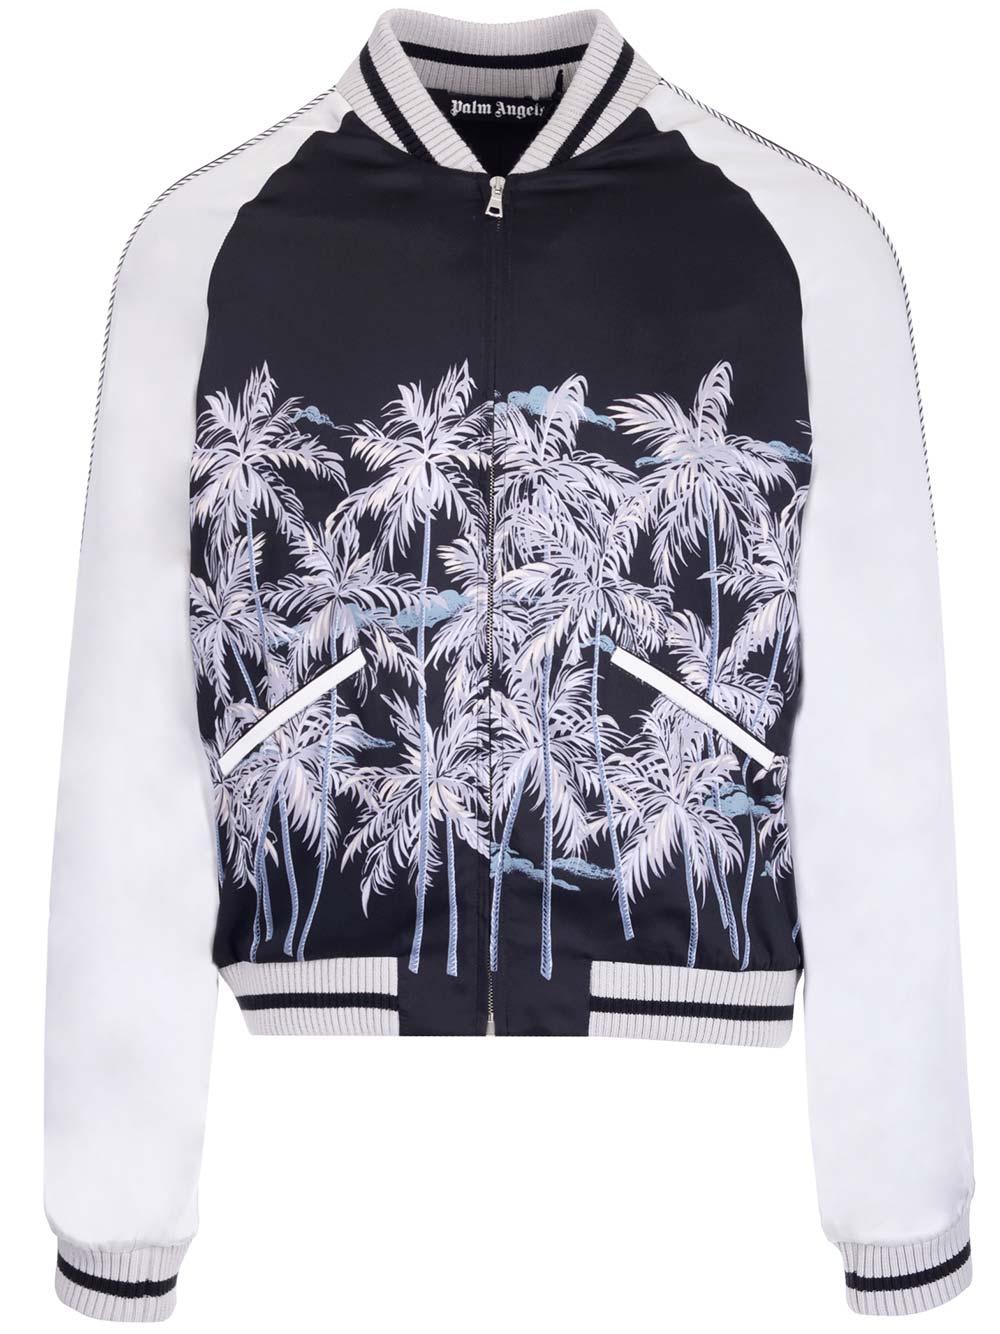 PALM ANGELS PALM ANGELS ZIP-UP LONG-SLEEVED JACKET